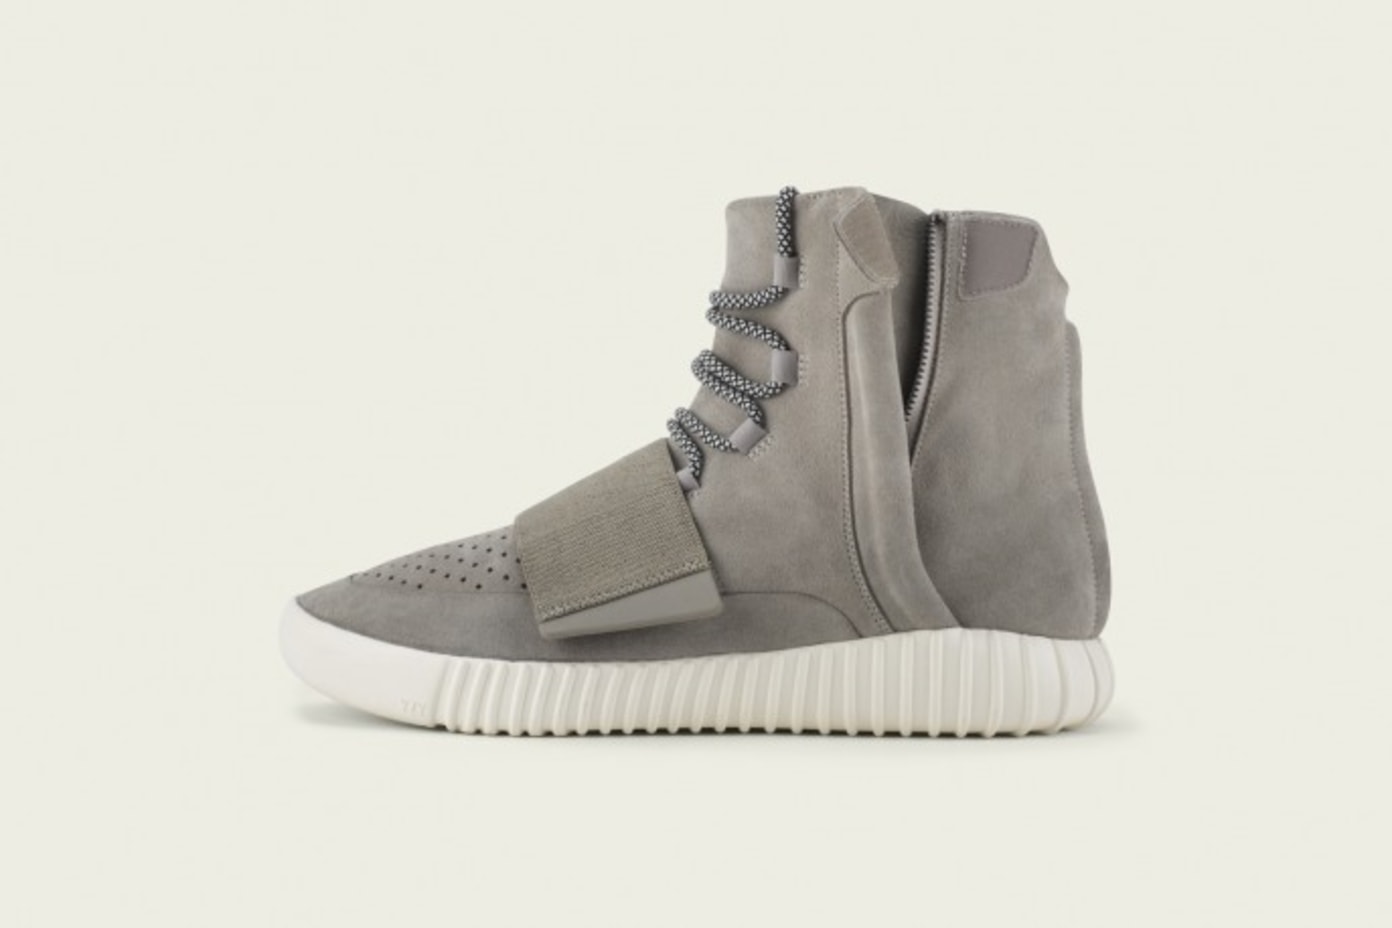 adidas Yeezy Boost Dropping at 